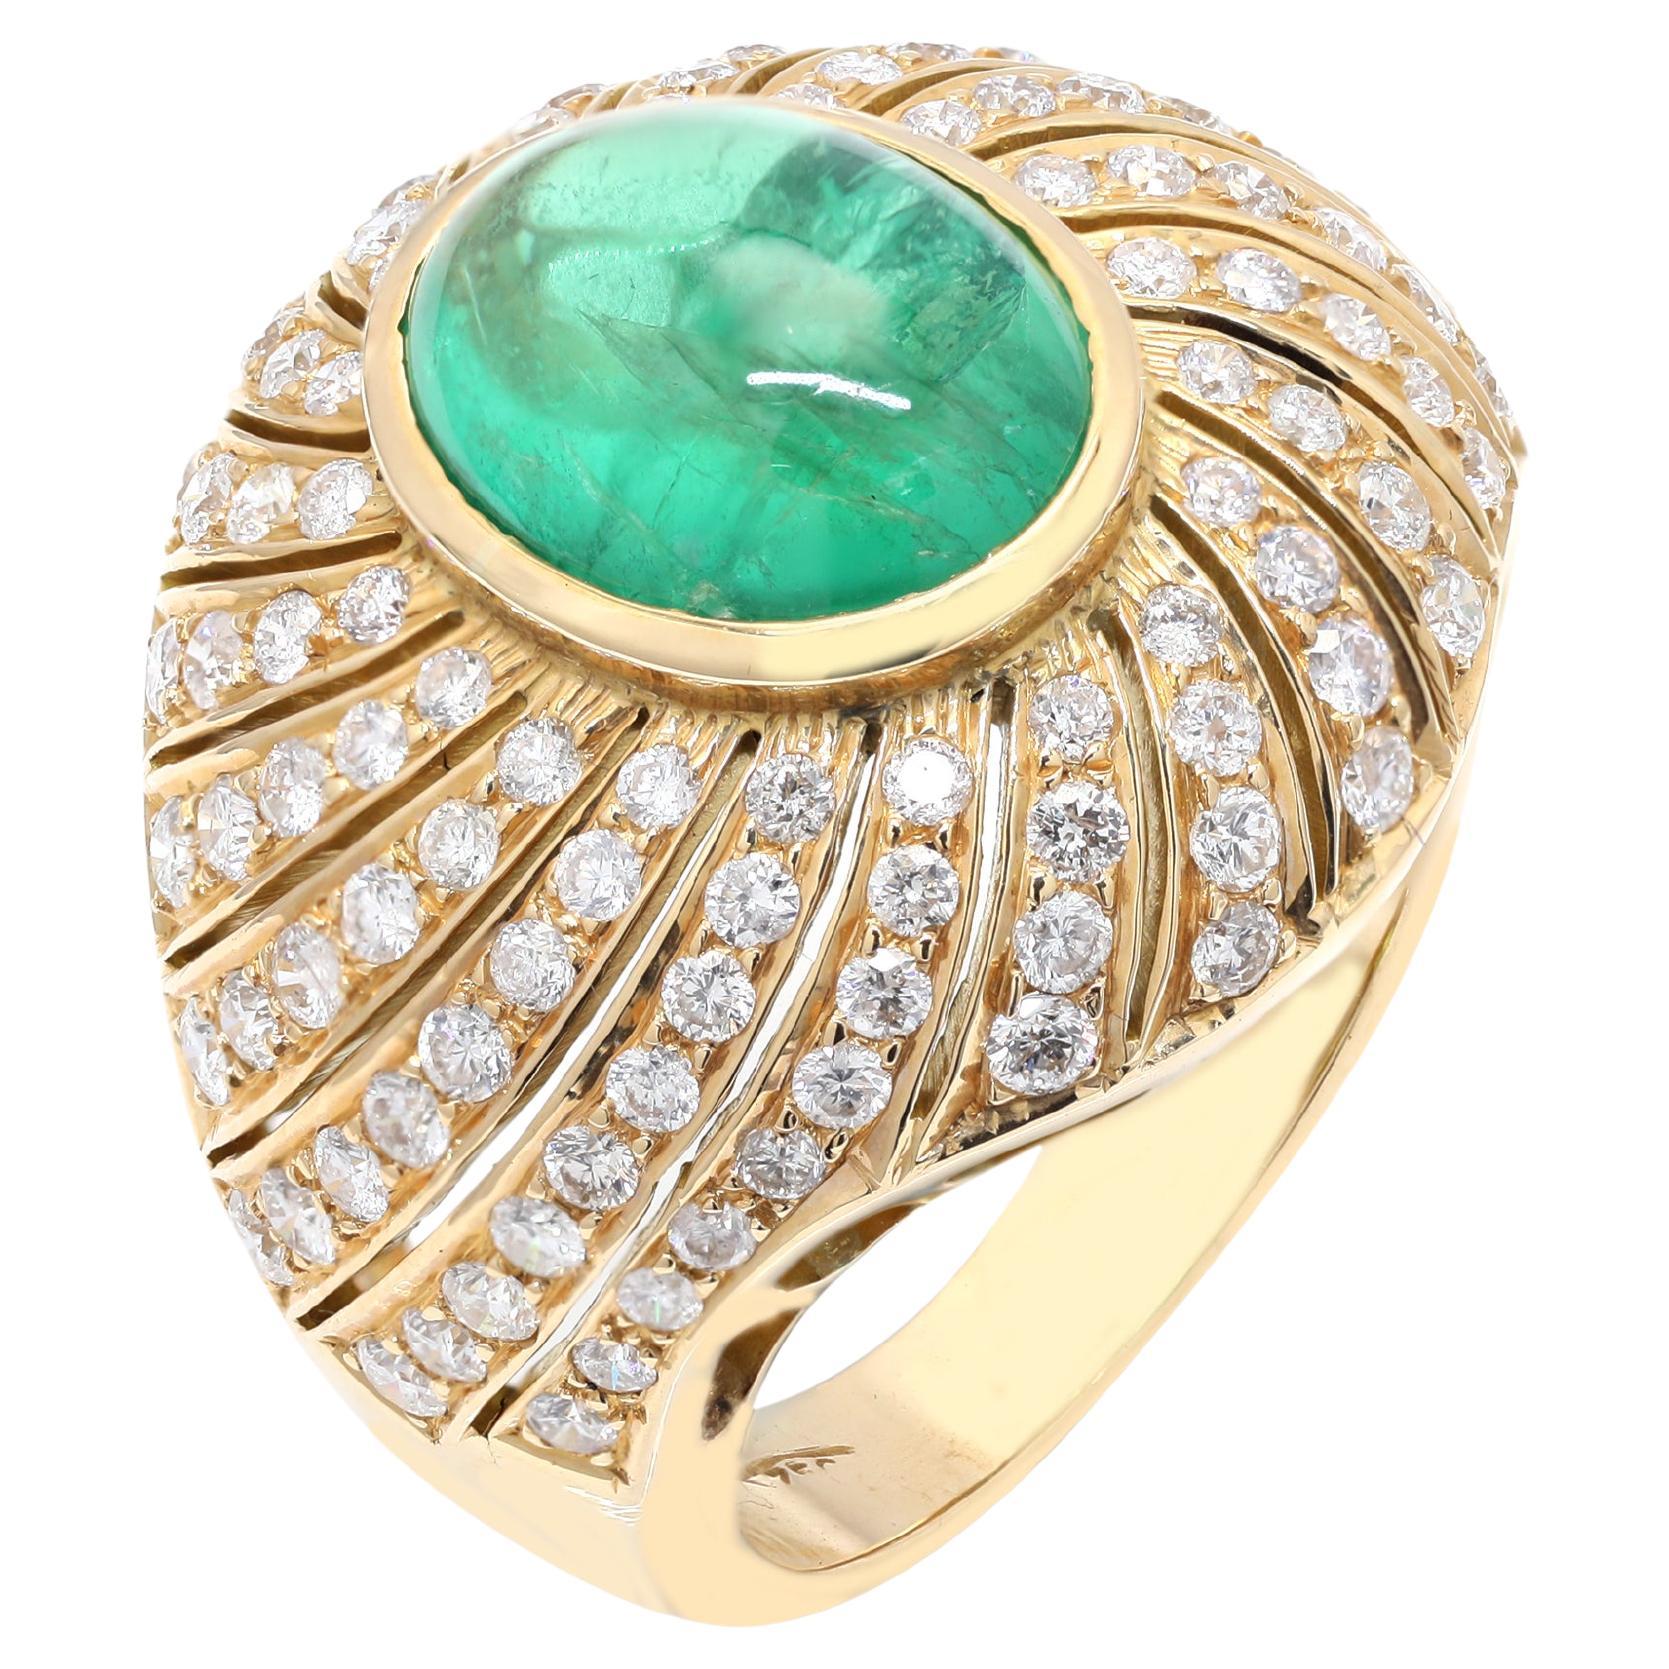 For Sale:  Mesmerizing 4.38 Carat Emerald Cocktail Ring with Diamonds in 18K Yellow Gold